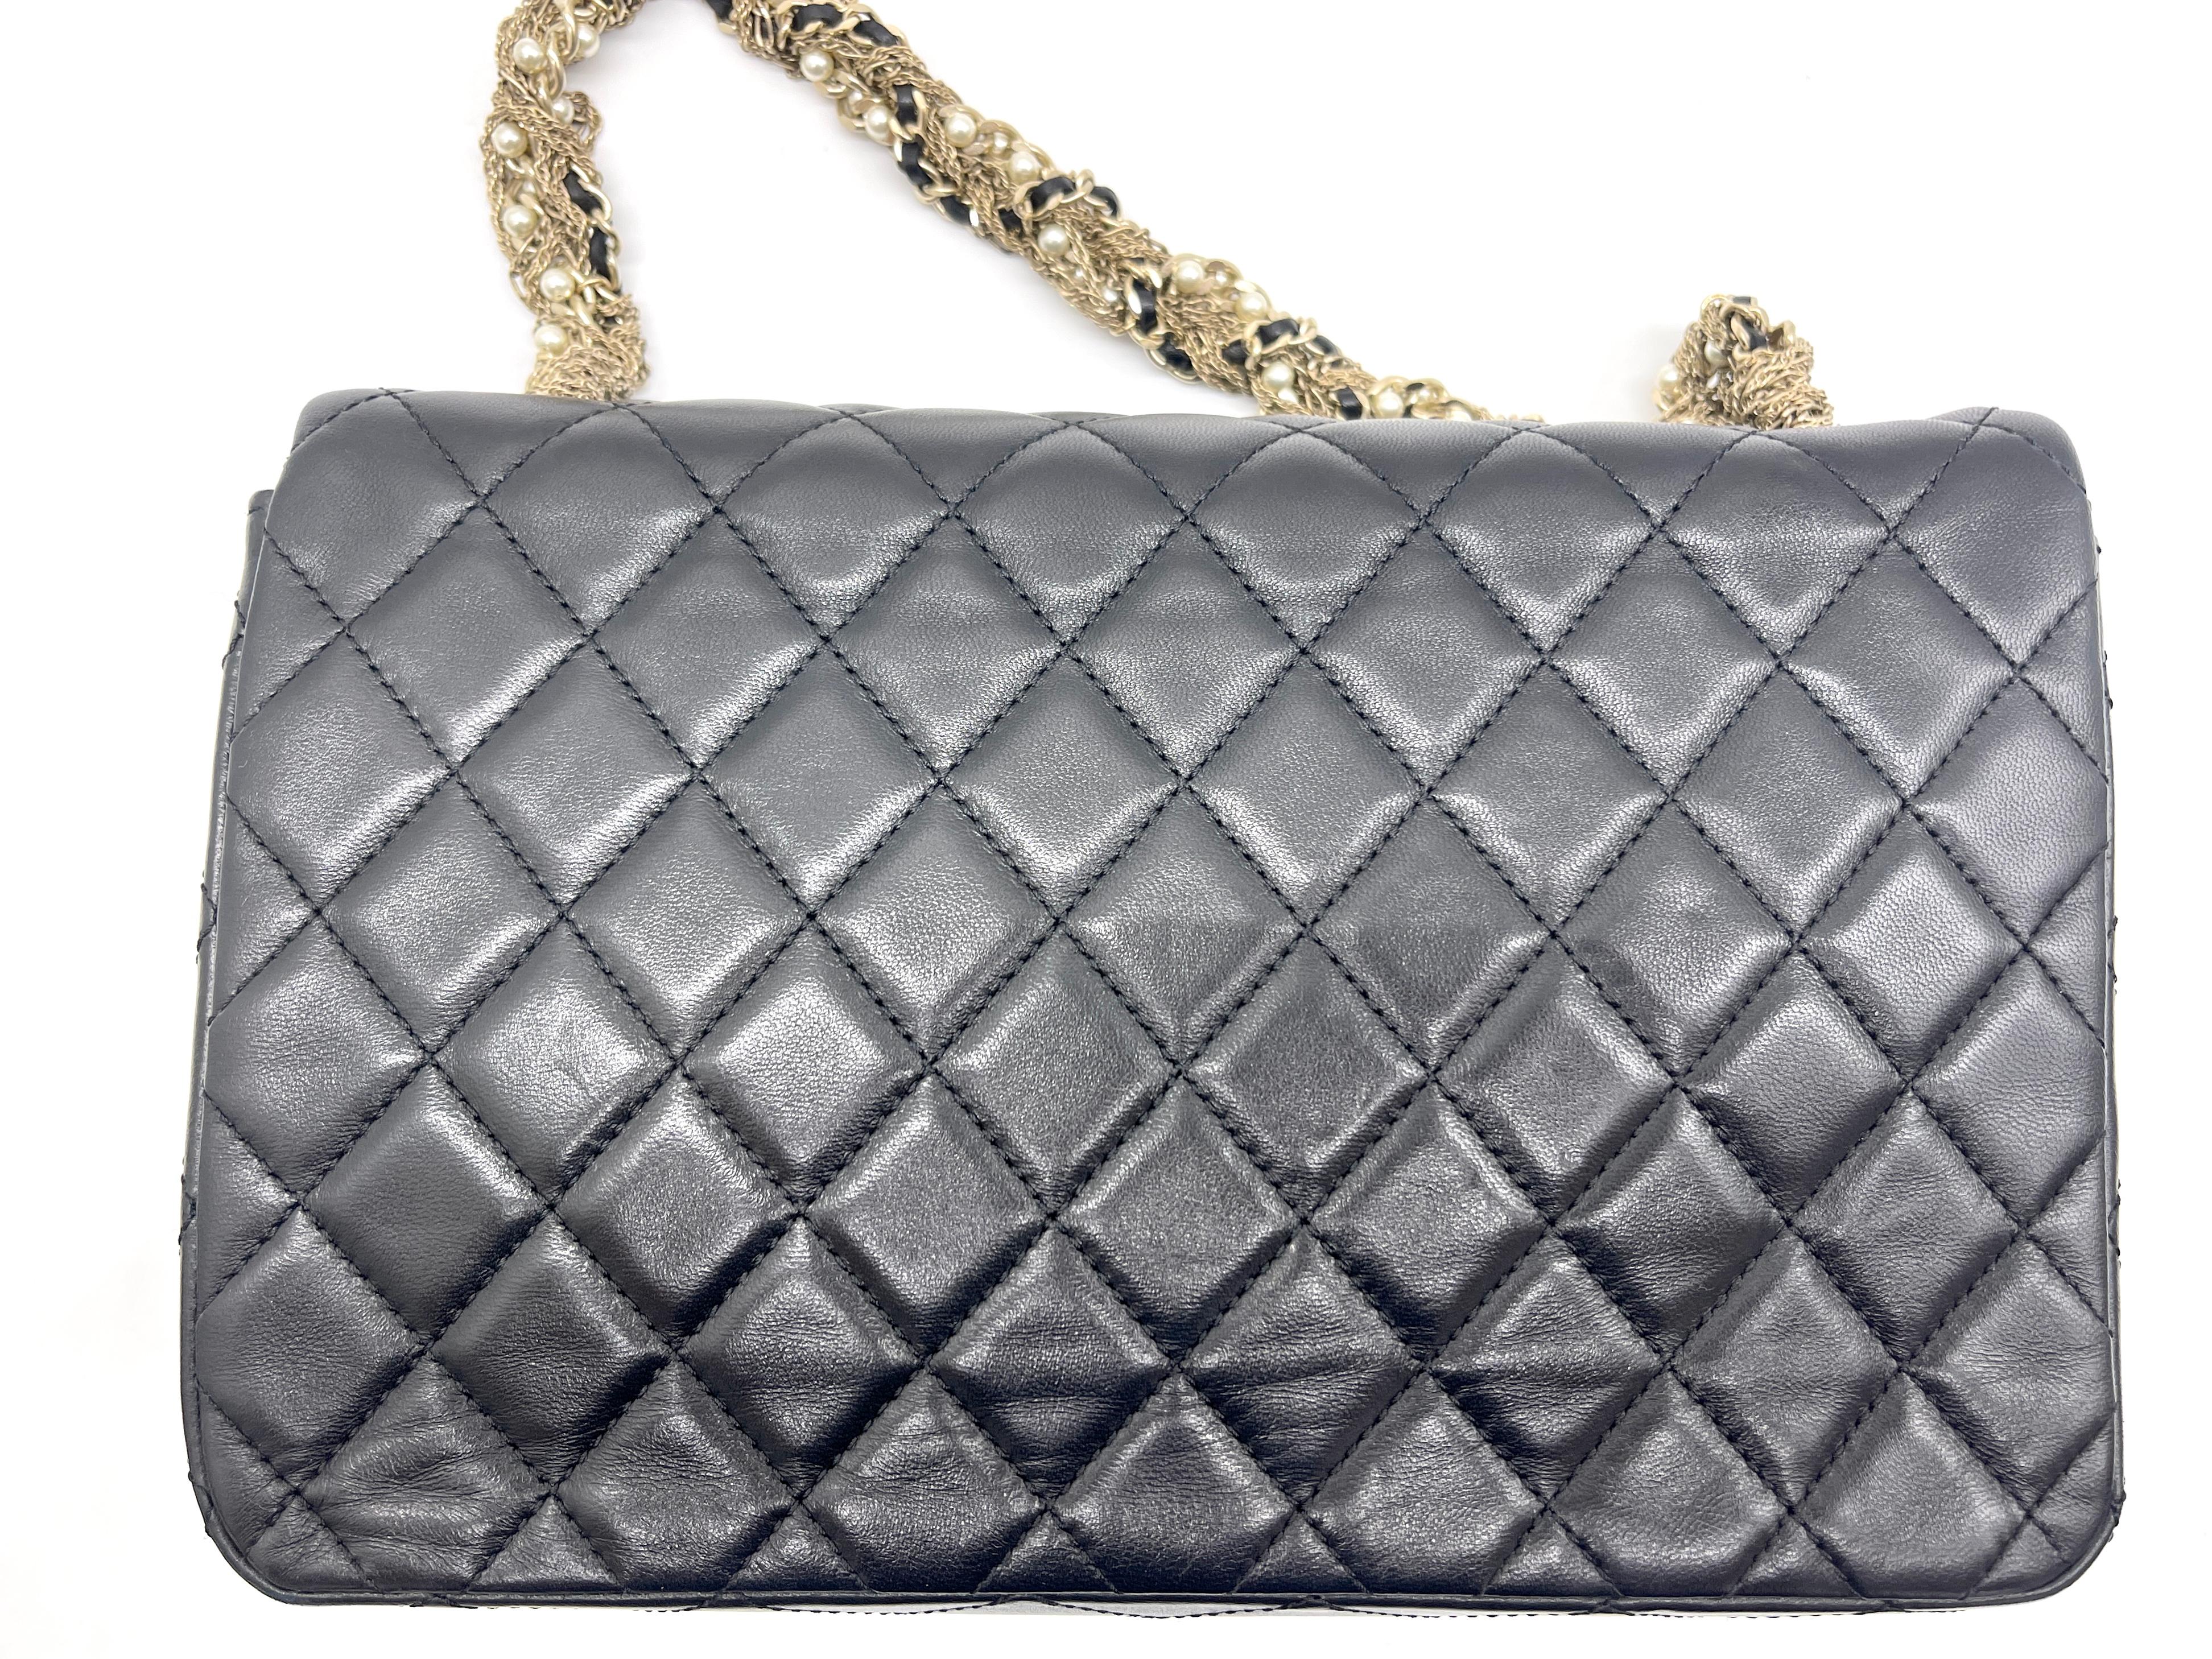 WOMENS DESIGNER Chanel black quilted lambskin medium westminster pearl flap bag For Sale 1